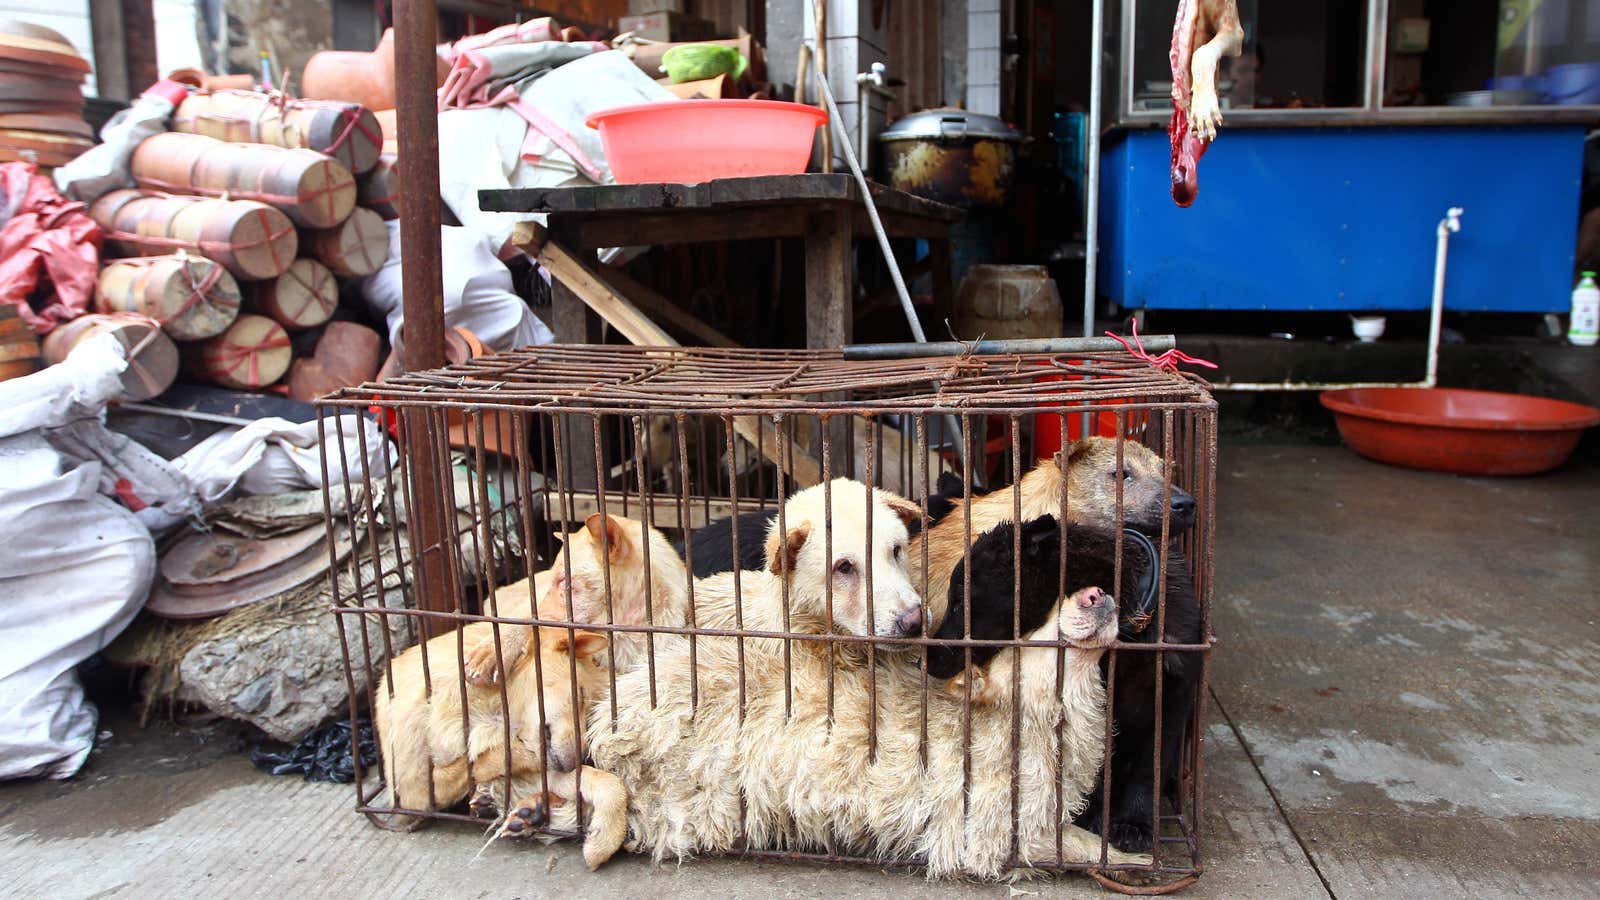 Dogs awaiting slaughter in Yulin in 2014.